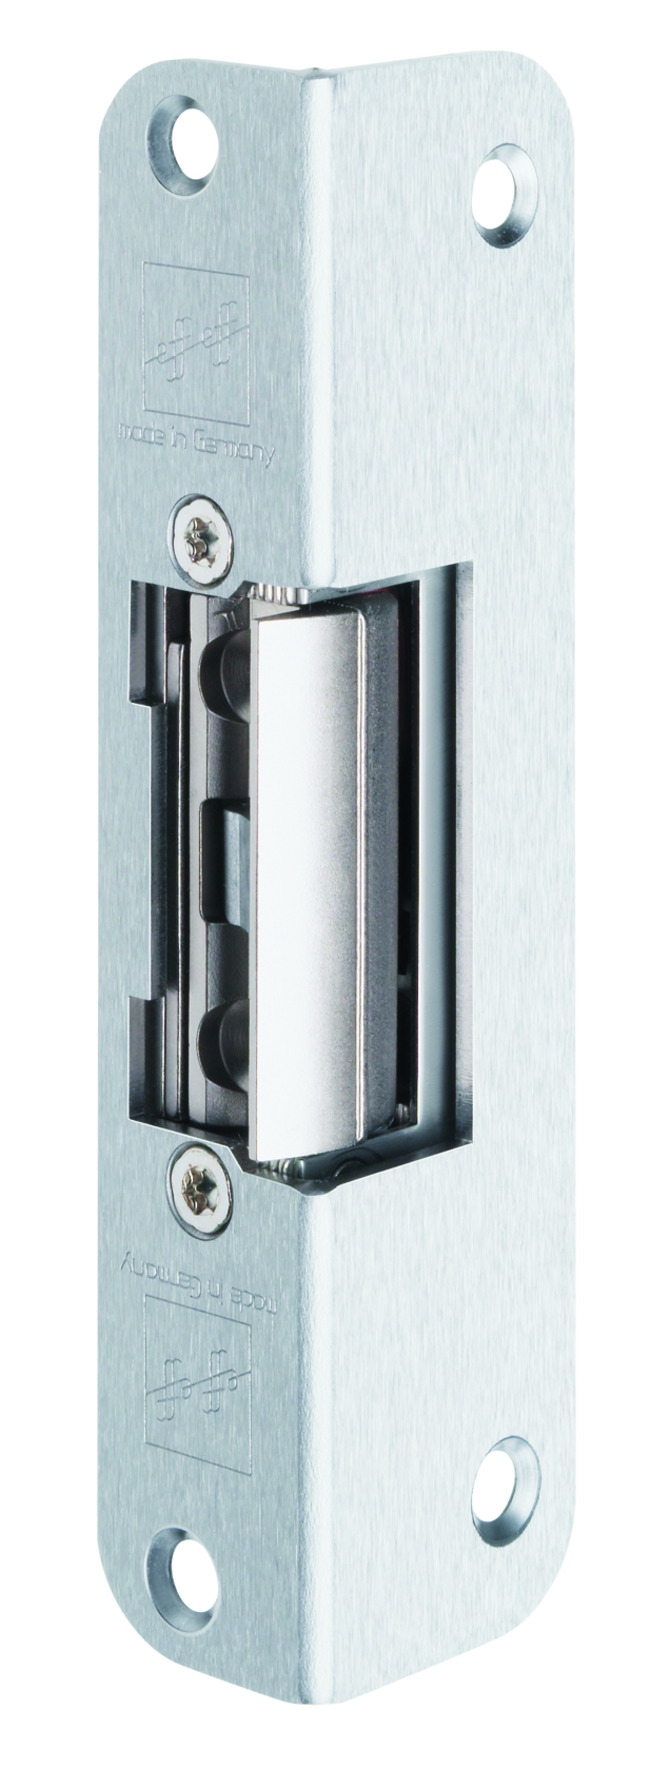 Escape Door Strike with short, angled striking plate 332.80-60335